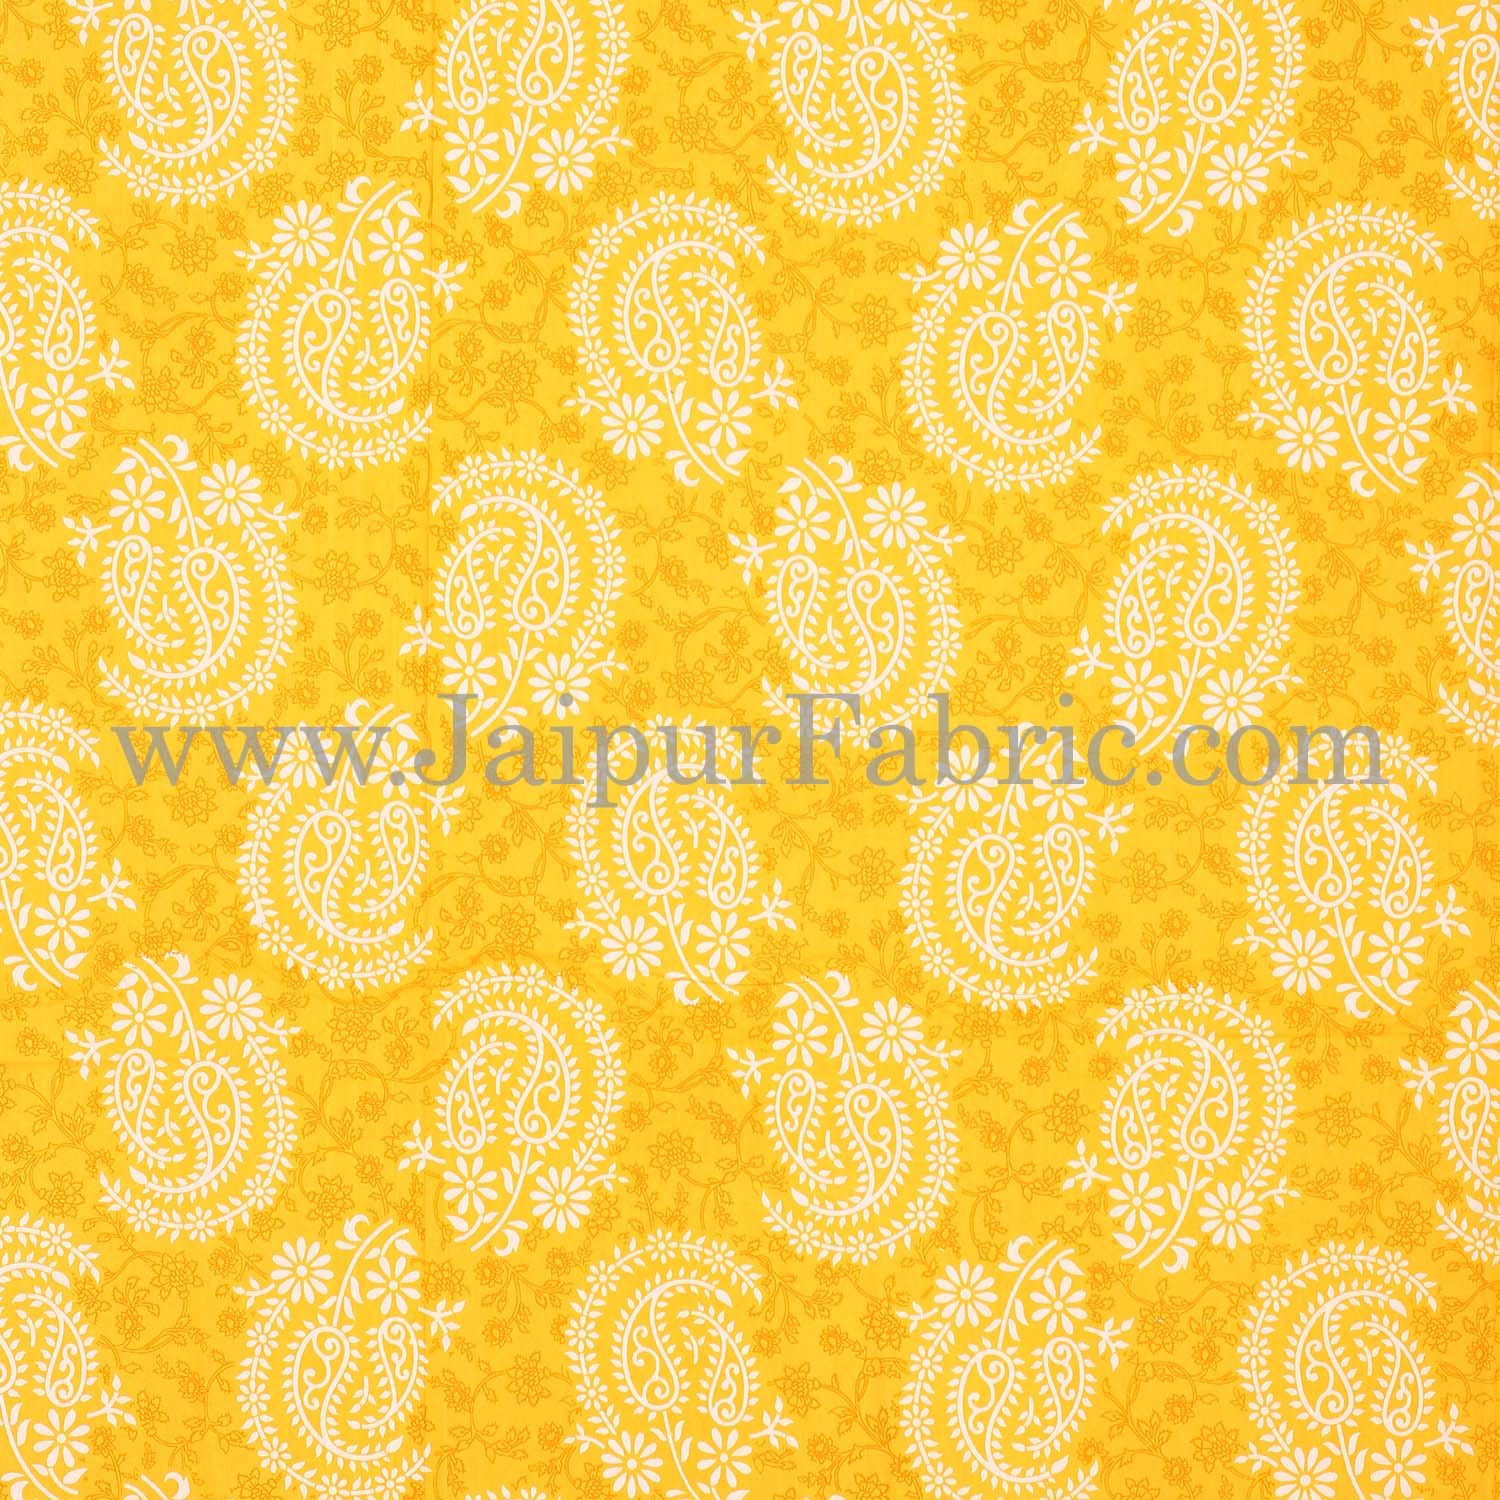 Yellow  Border With Zig-Zig Lining Twin Kerry Pattern Cotton Double Bed Sheet